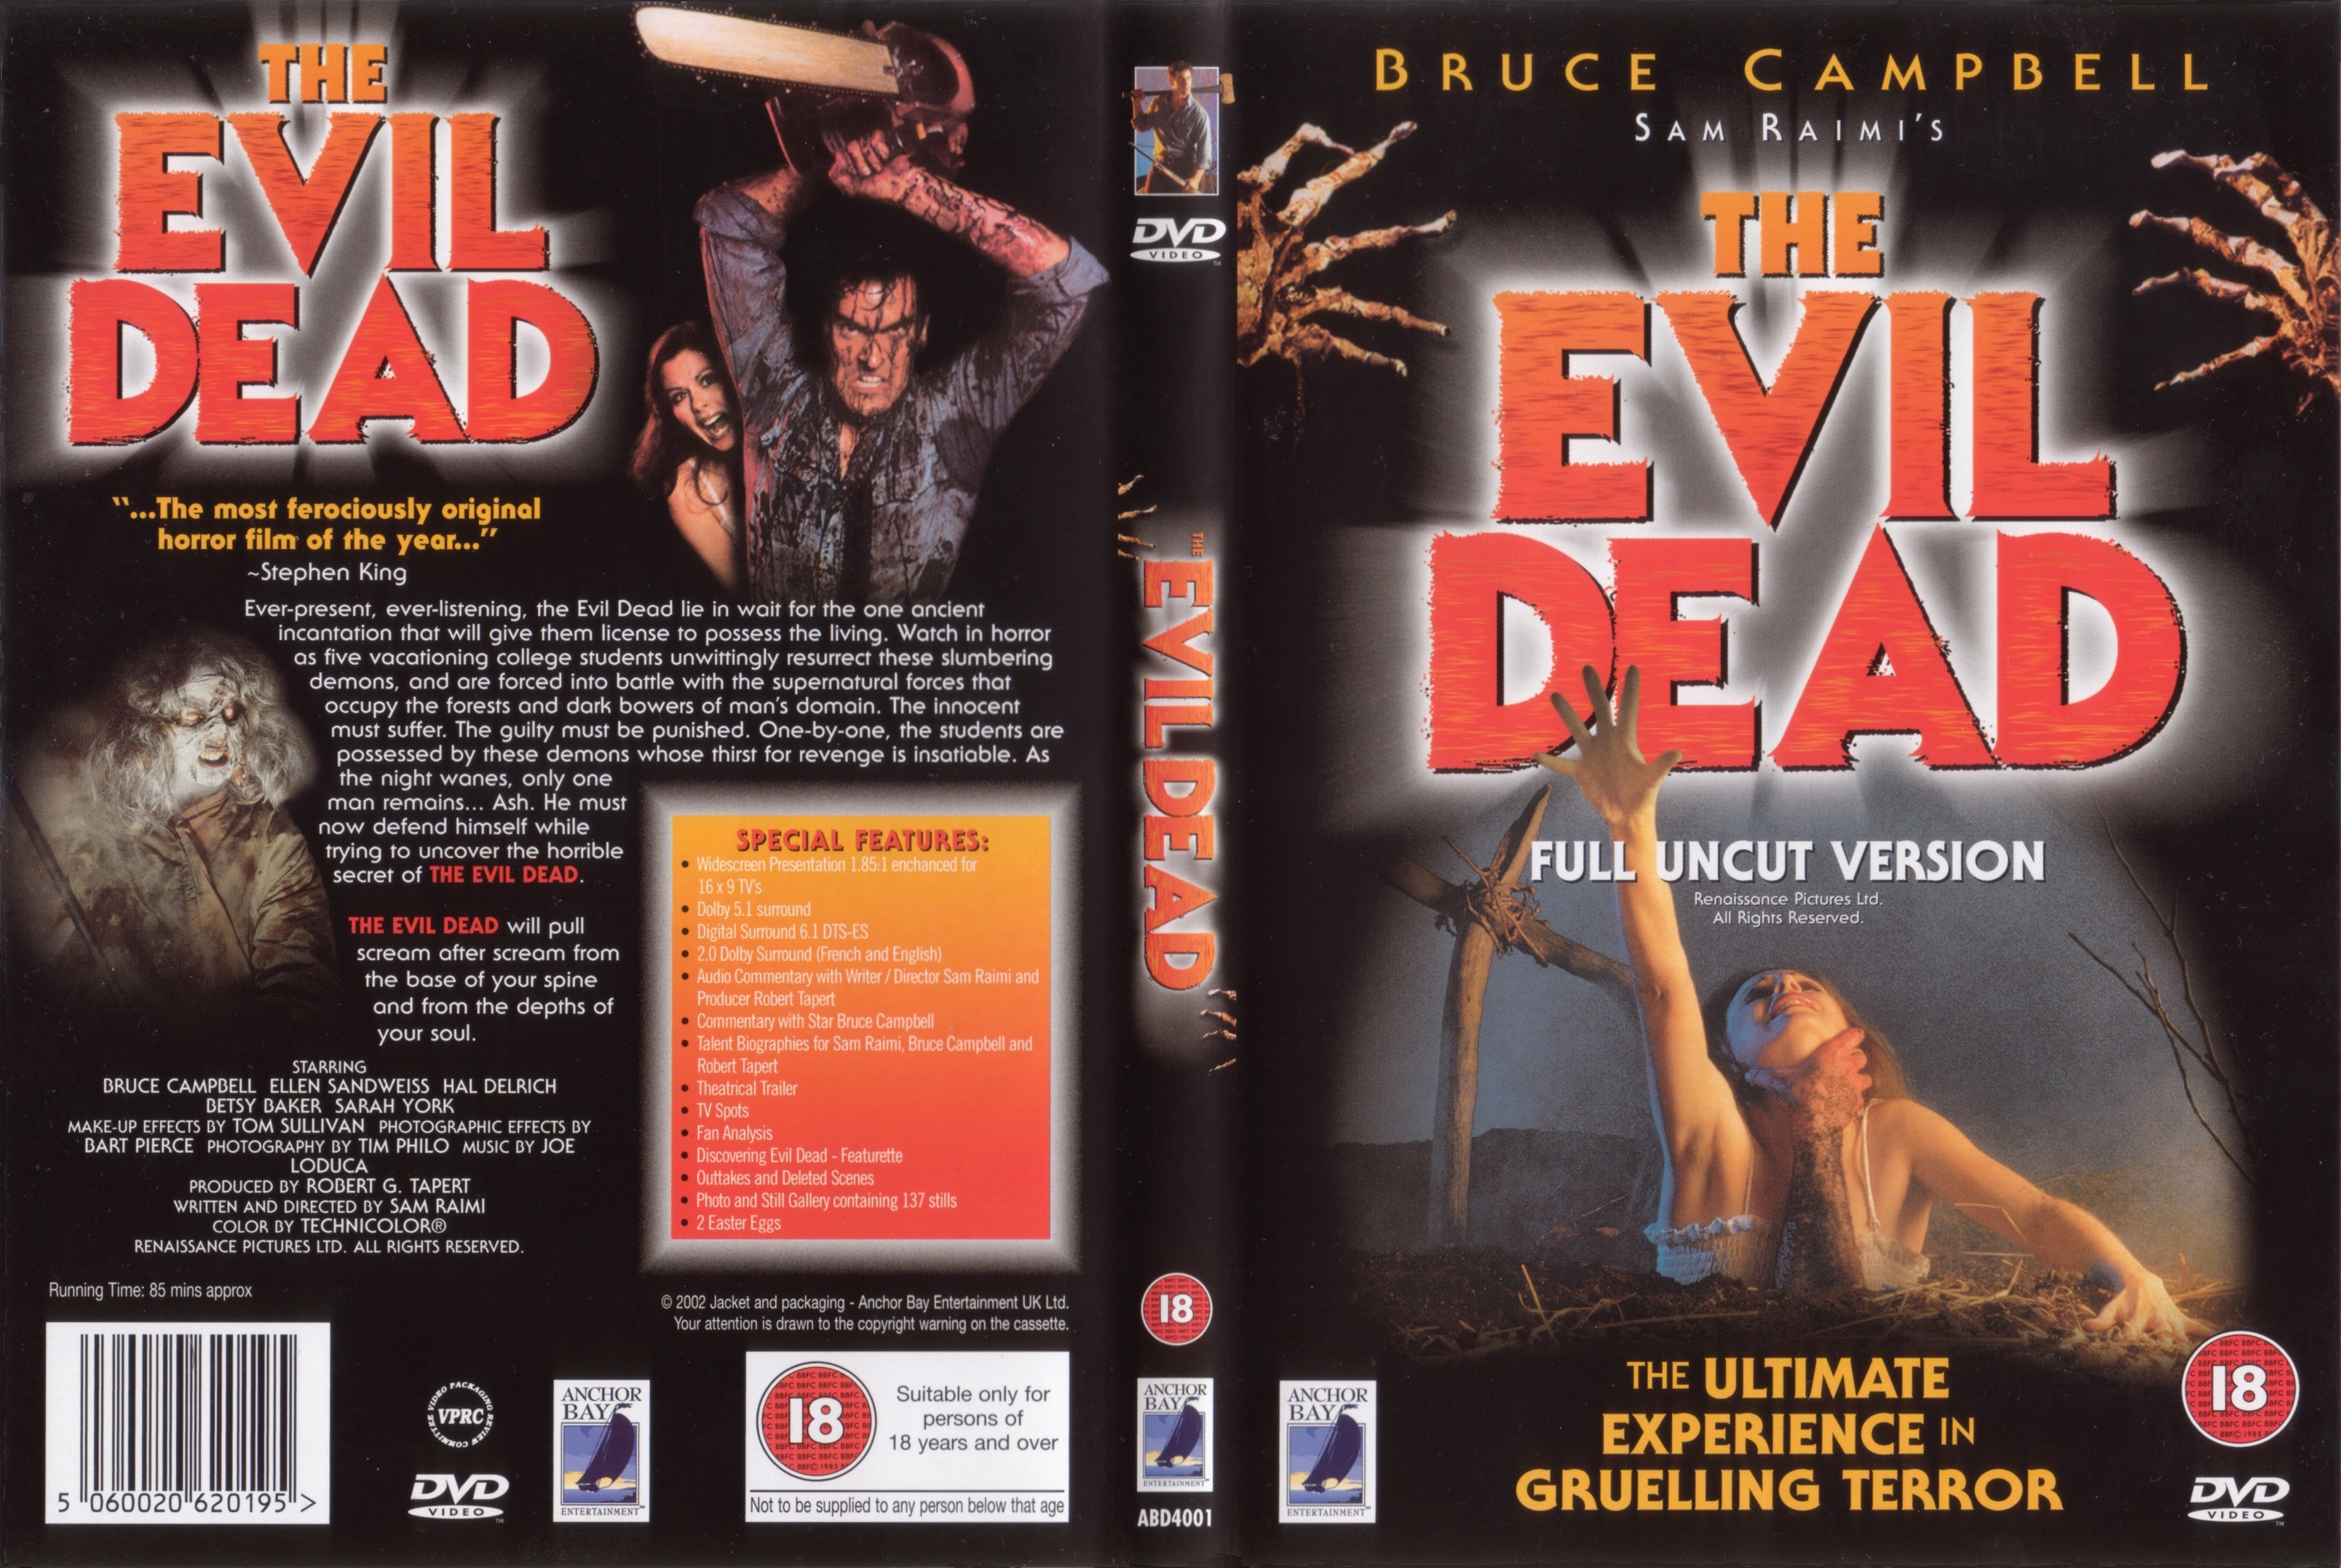 The Evil Dead - DVD Cover Art Brazil : LW Editora : Free Download, Borrow,  and Streaming : Internet Archive